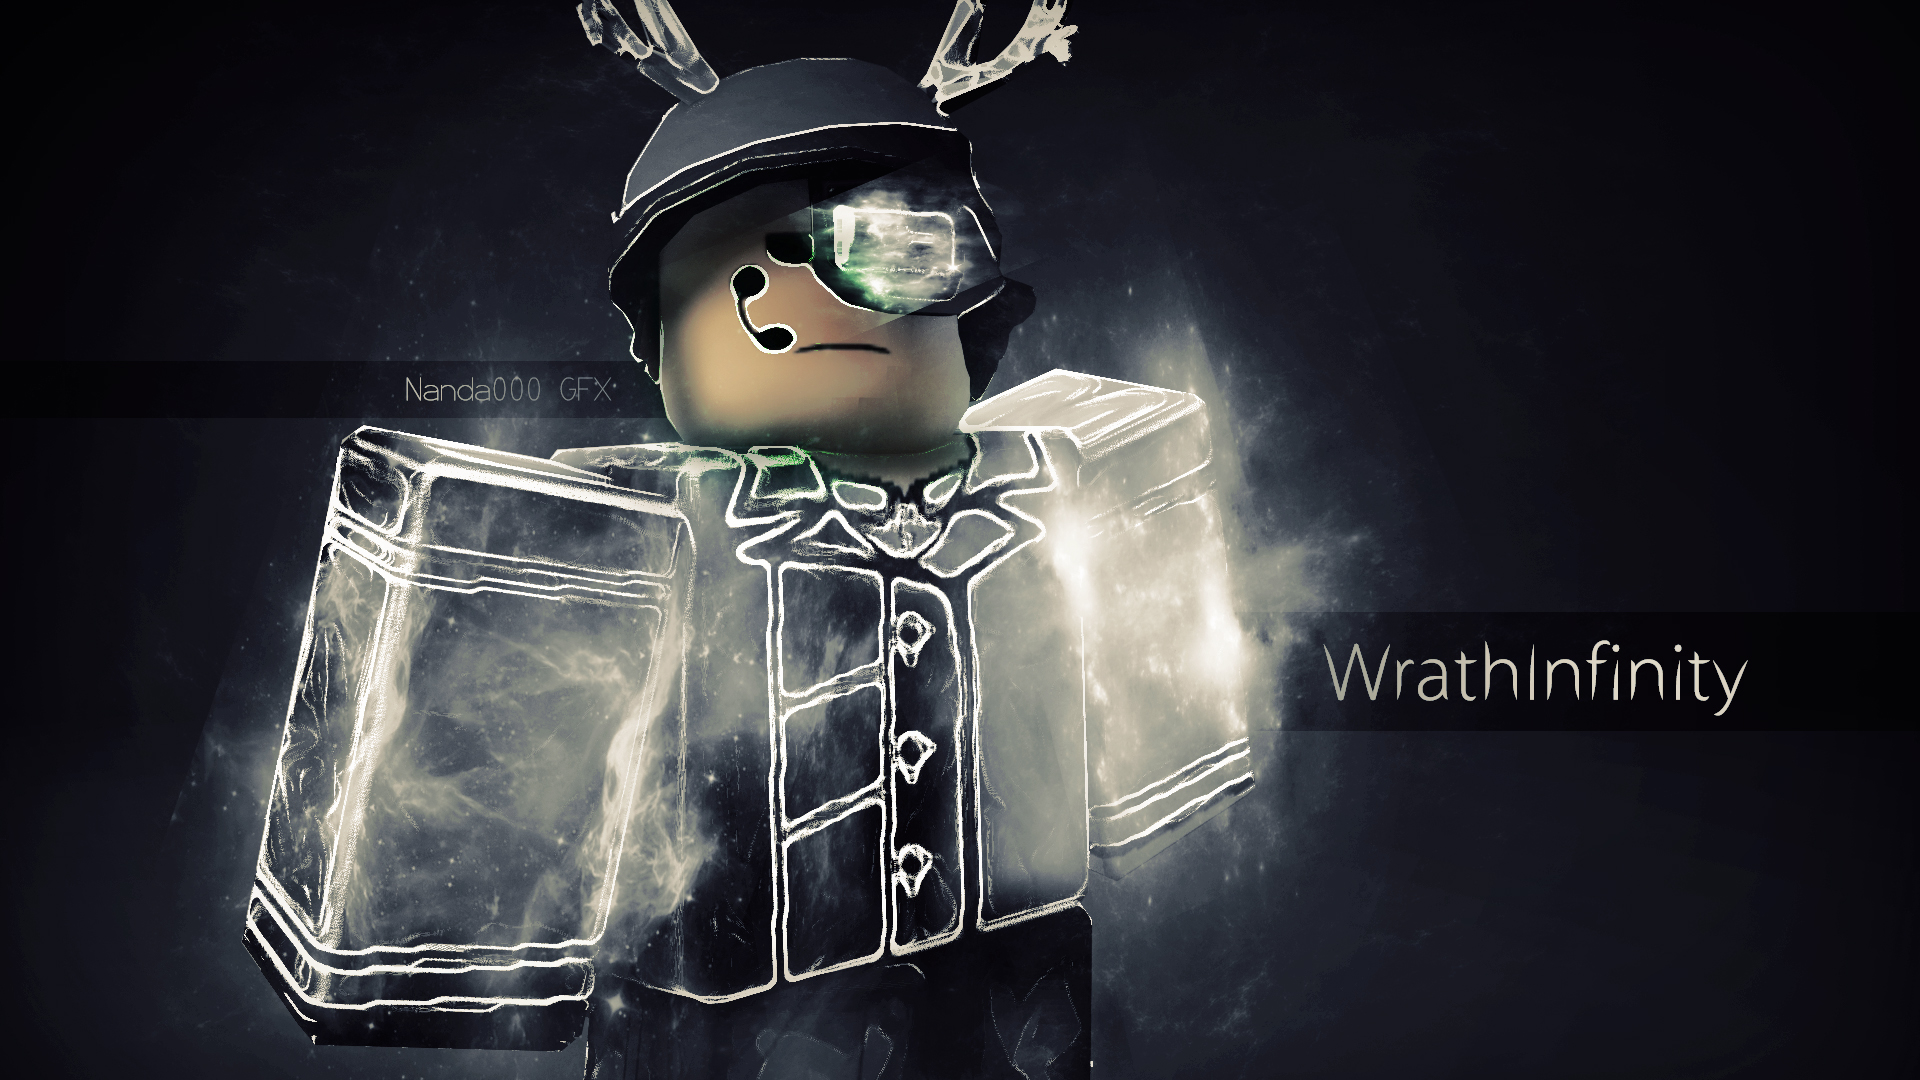 acorp version // #2021carried #roblox #edit #robloxedit #robloxslender